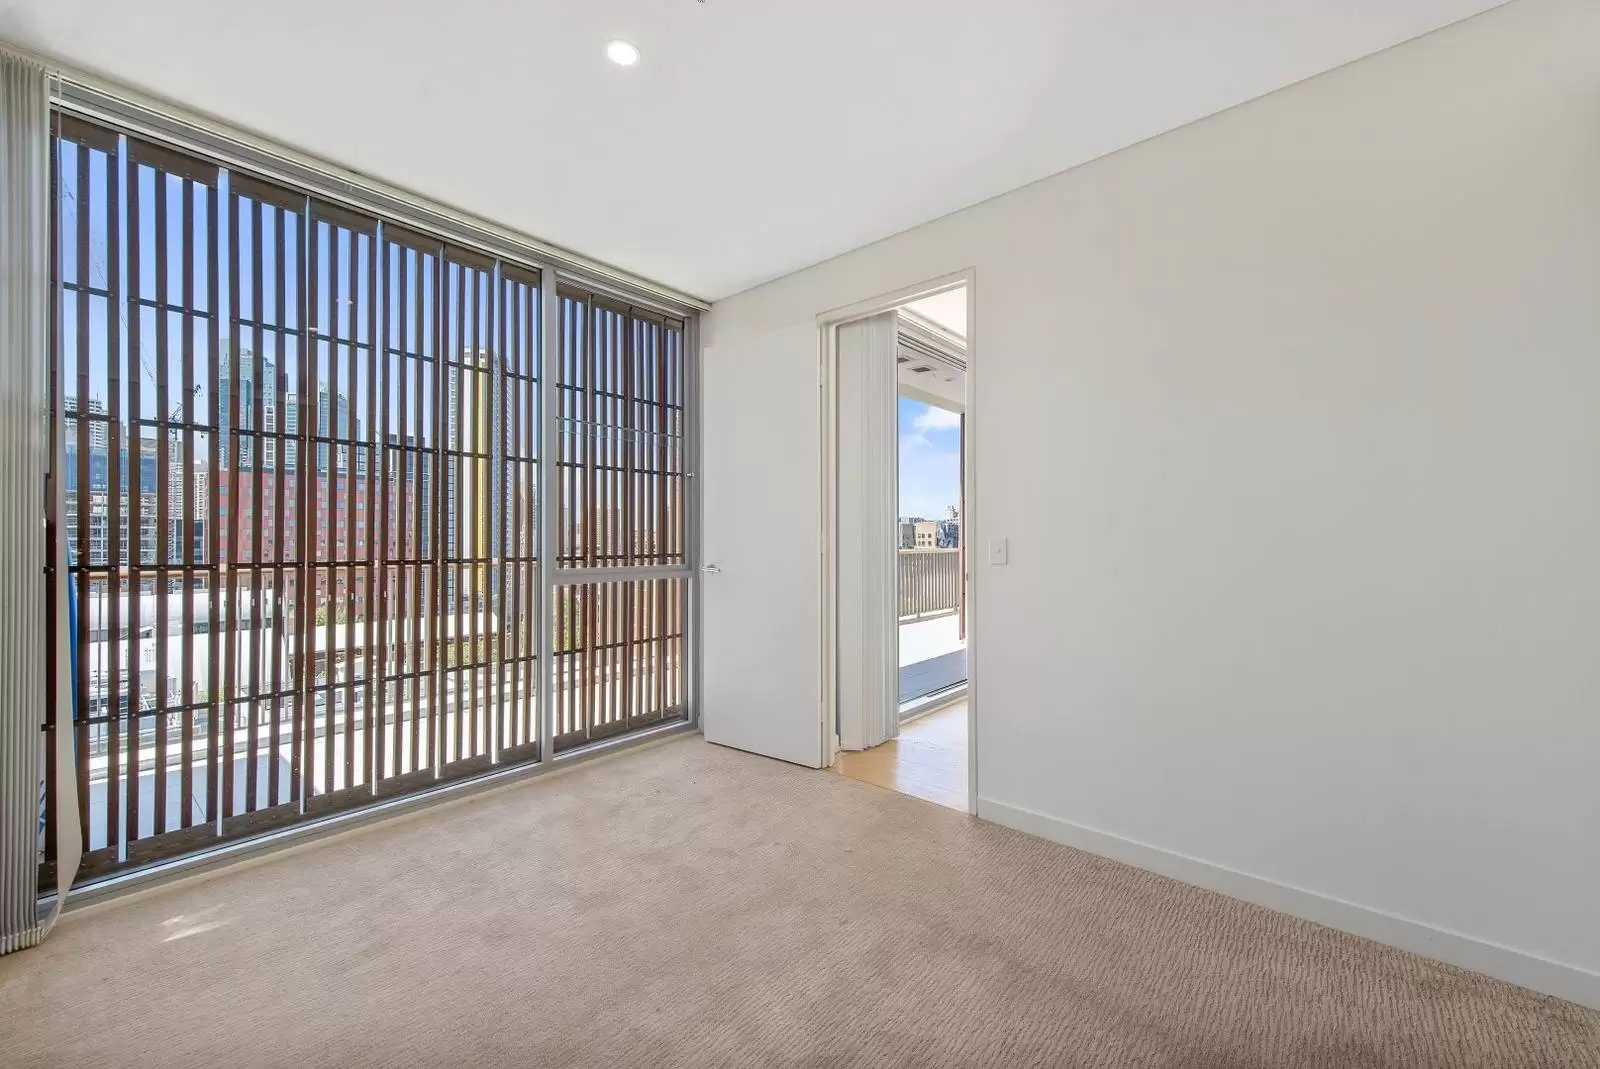 Photo #7: 902/349 Bulwara Road, Ultimo - Leased by Sydney Sotheby's International Realty